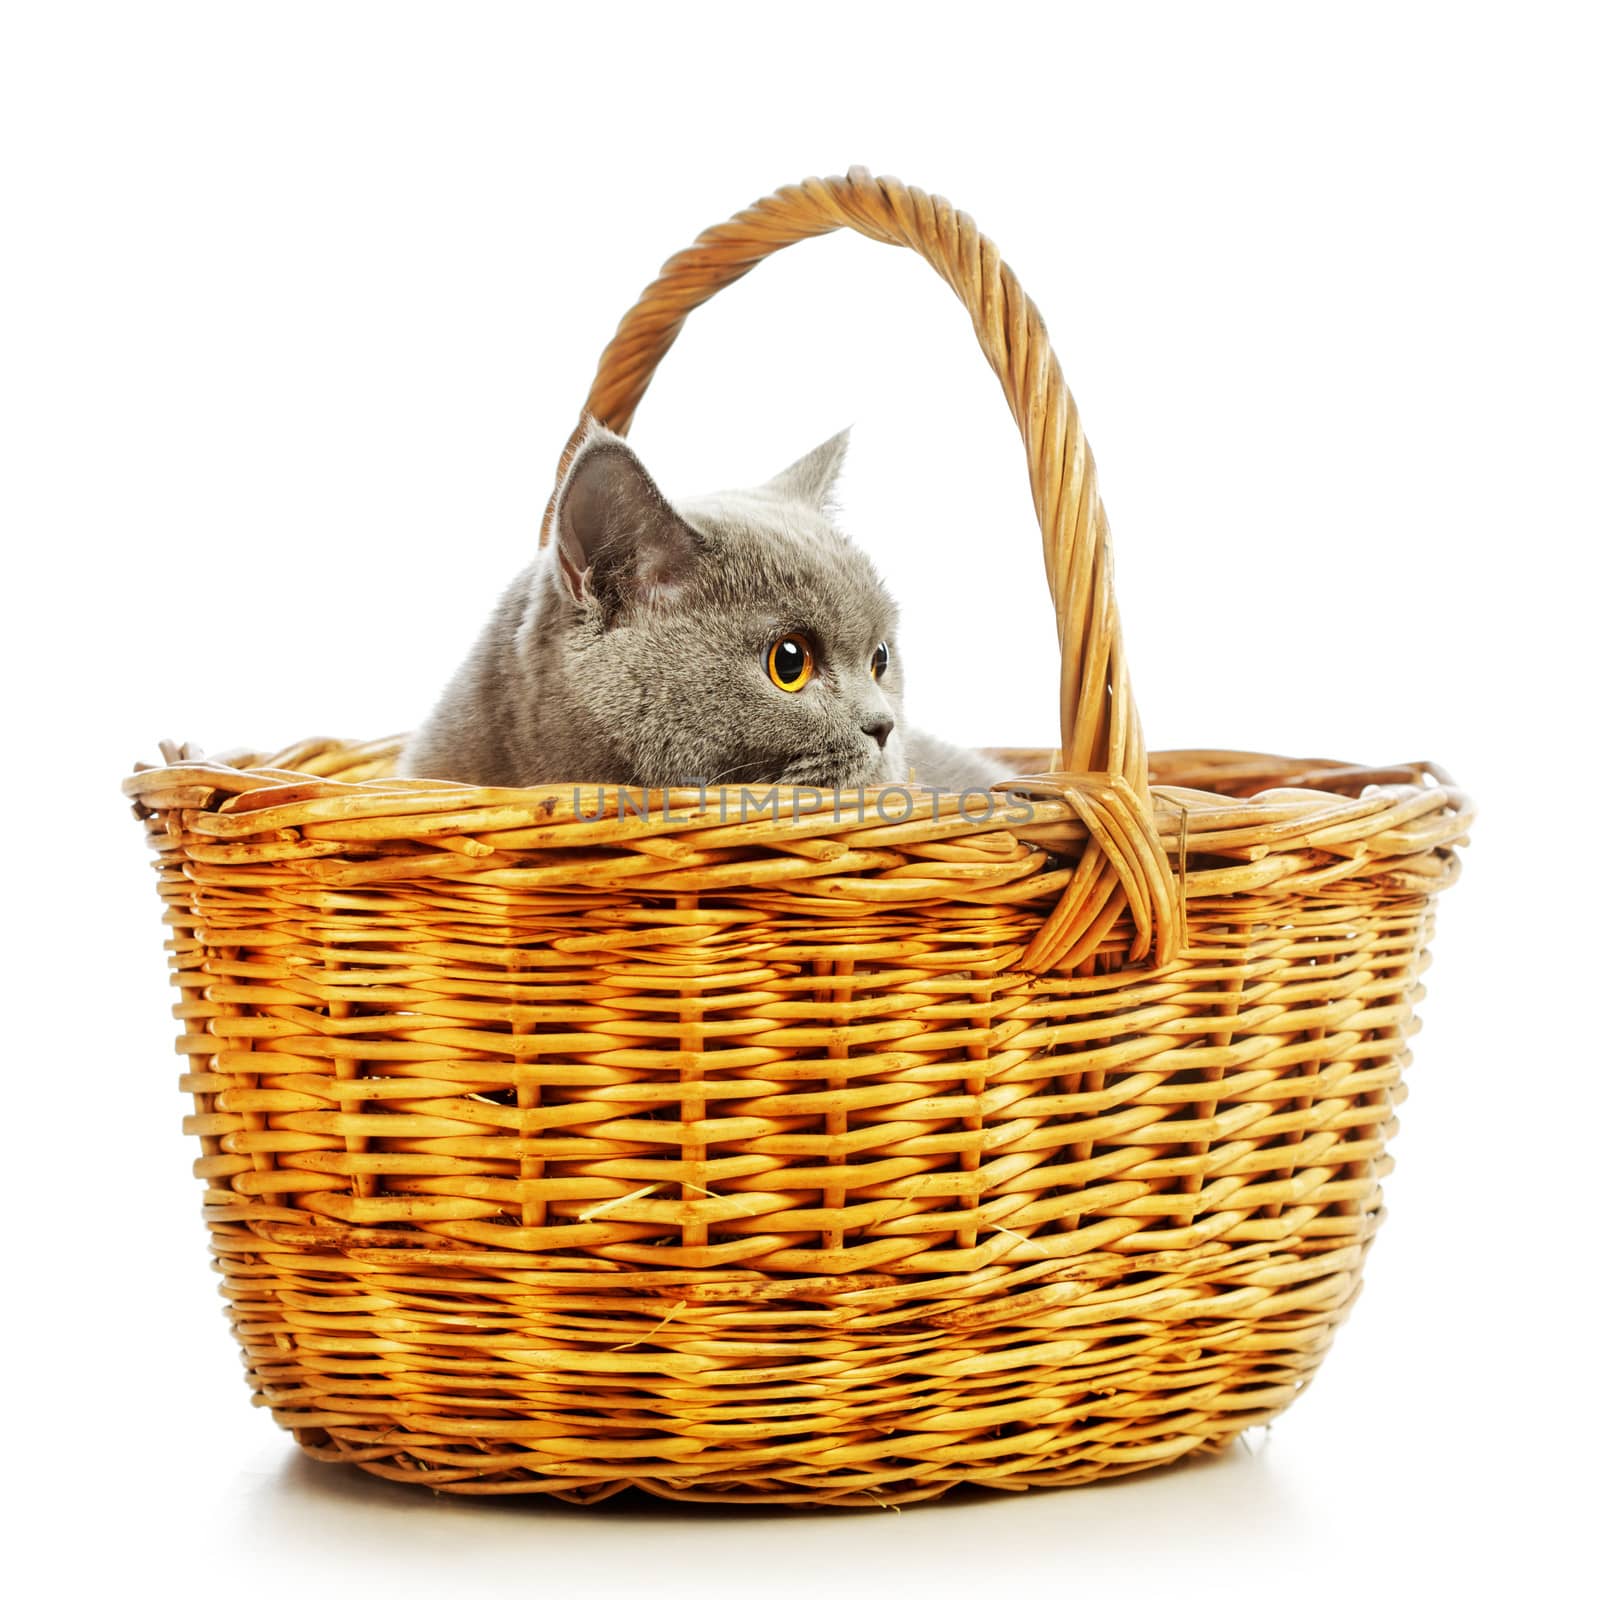 blue british shorthair cat in basket, isolated on white